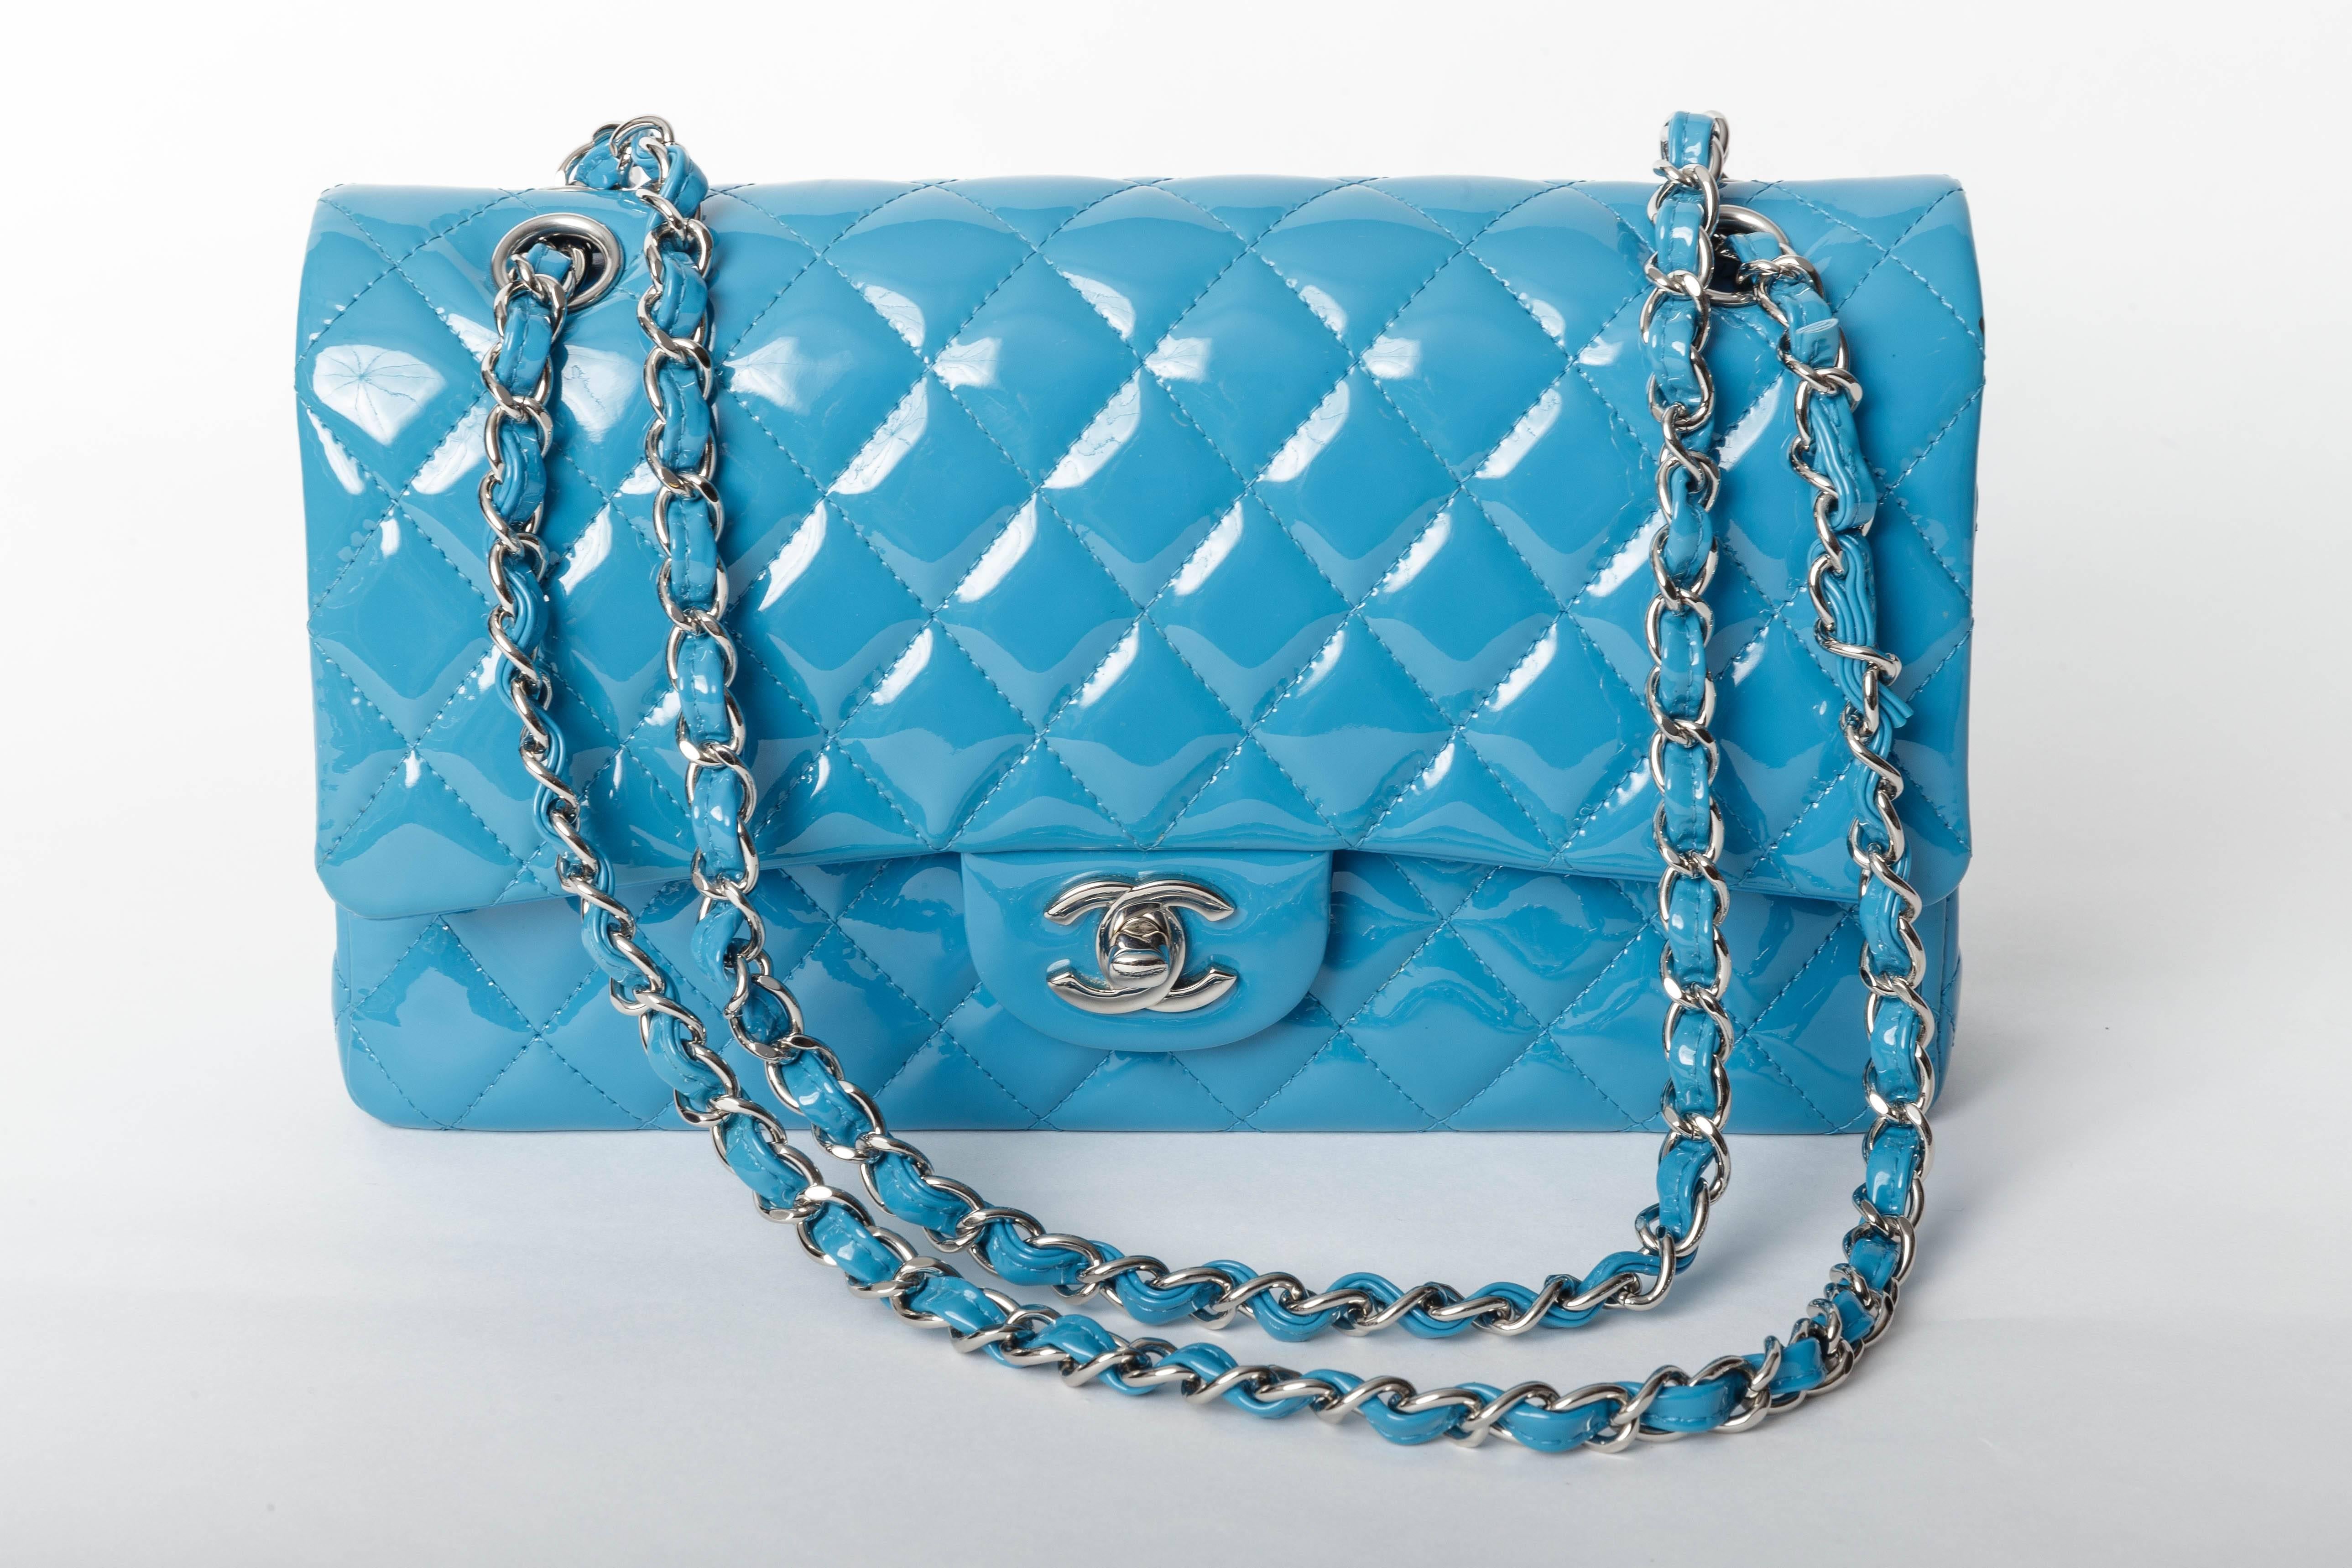 Stunning Chanel Double Flap Classic in Teal Patent with Silver Hardware
10 Inches in Excellent Condition
Dustbag is Included
Authenticity Card No 19485857 denotes the year 2014